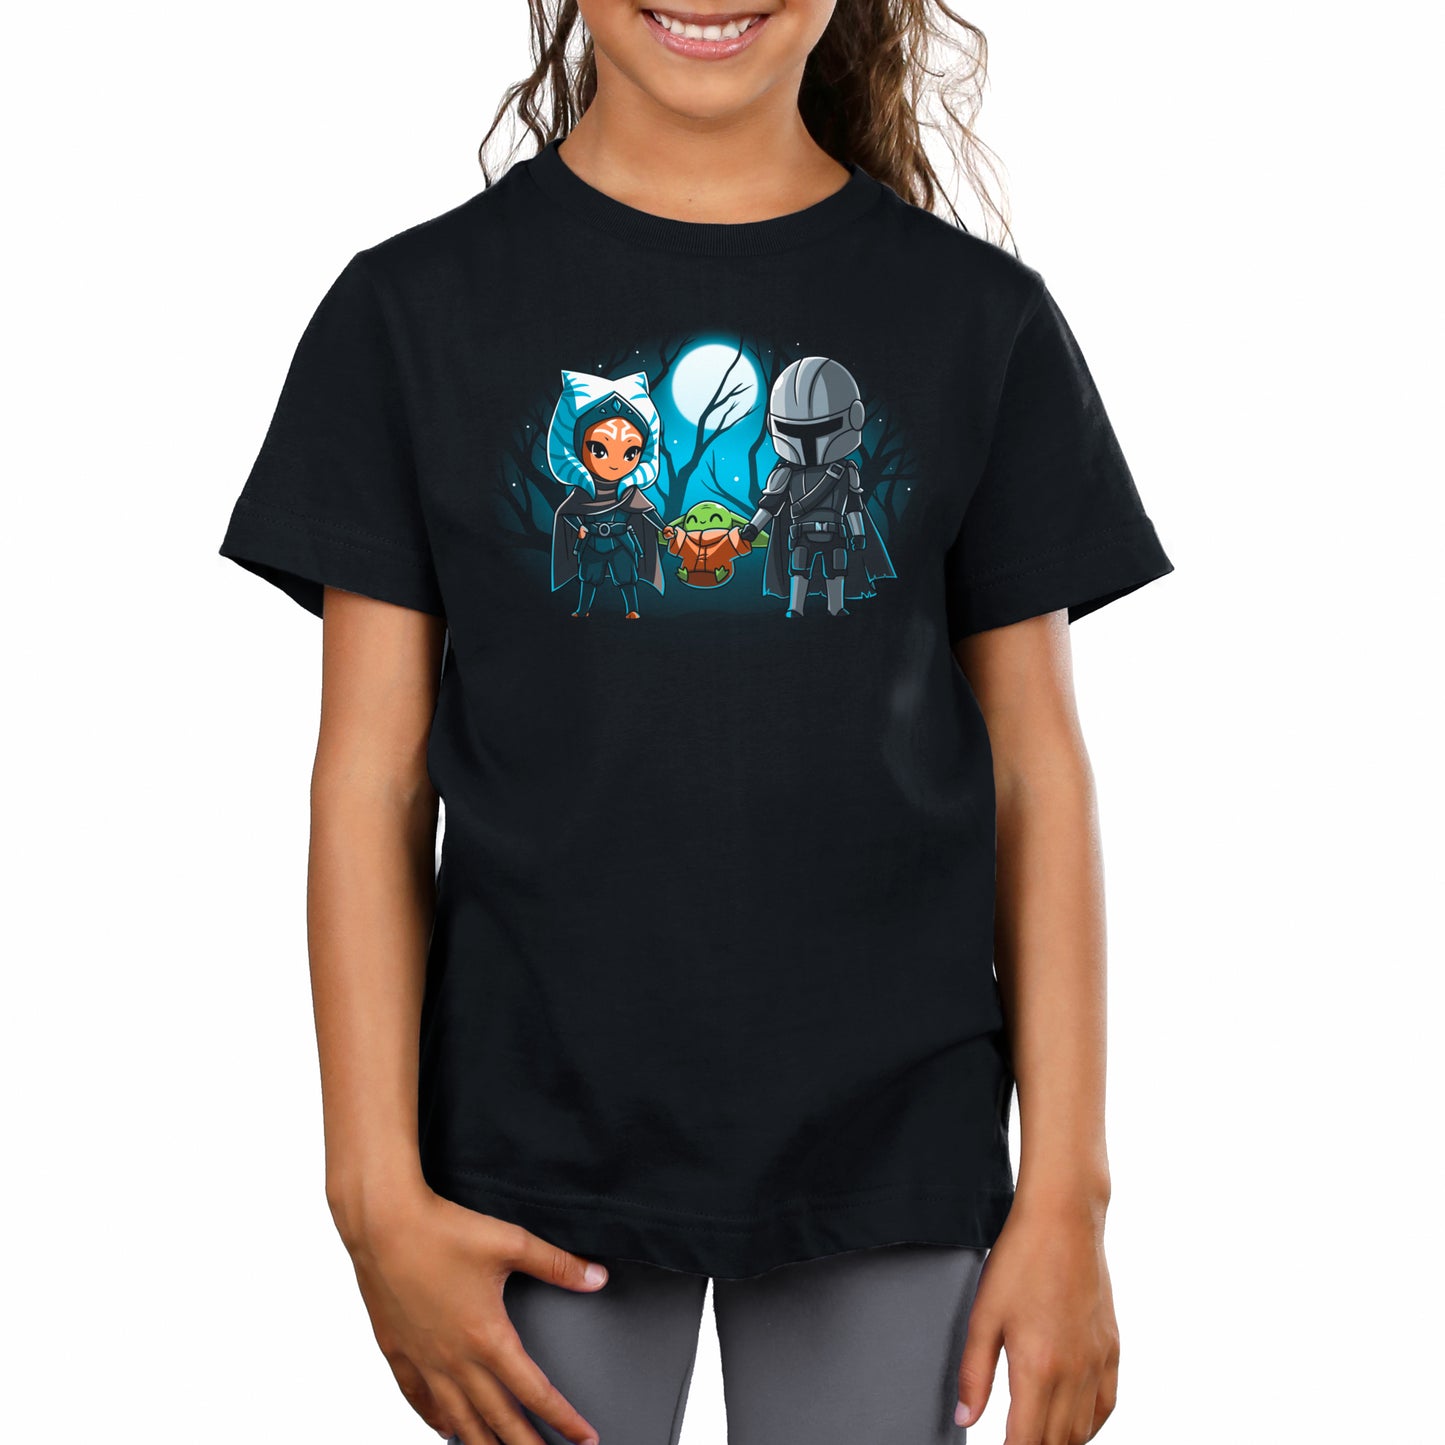 A girl wearing an officially licensed Star Wars Mandalorian t-shirt featuring Grogu's Family.